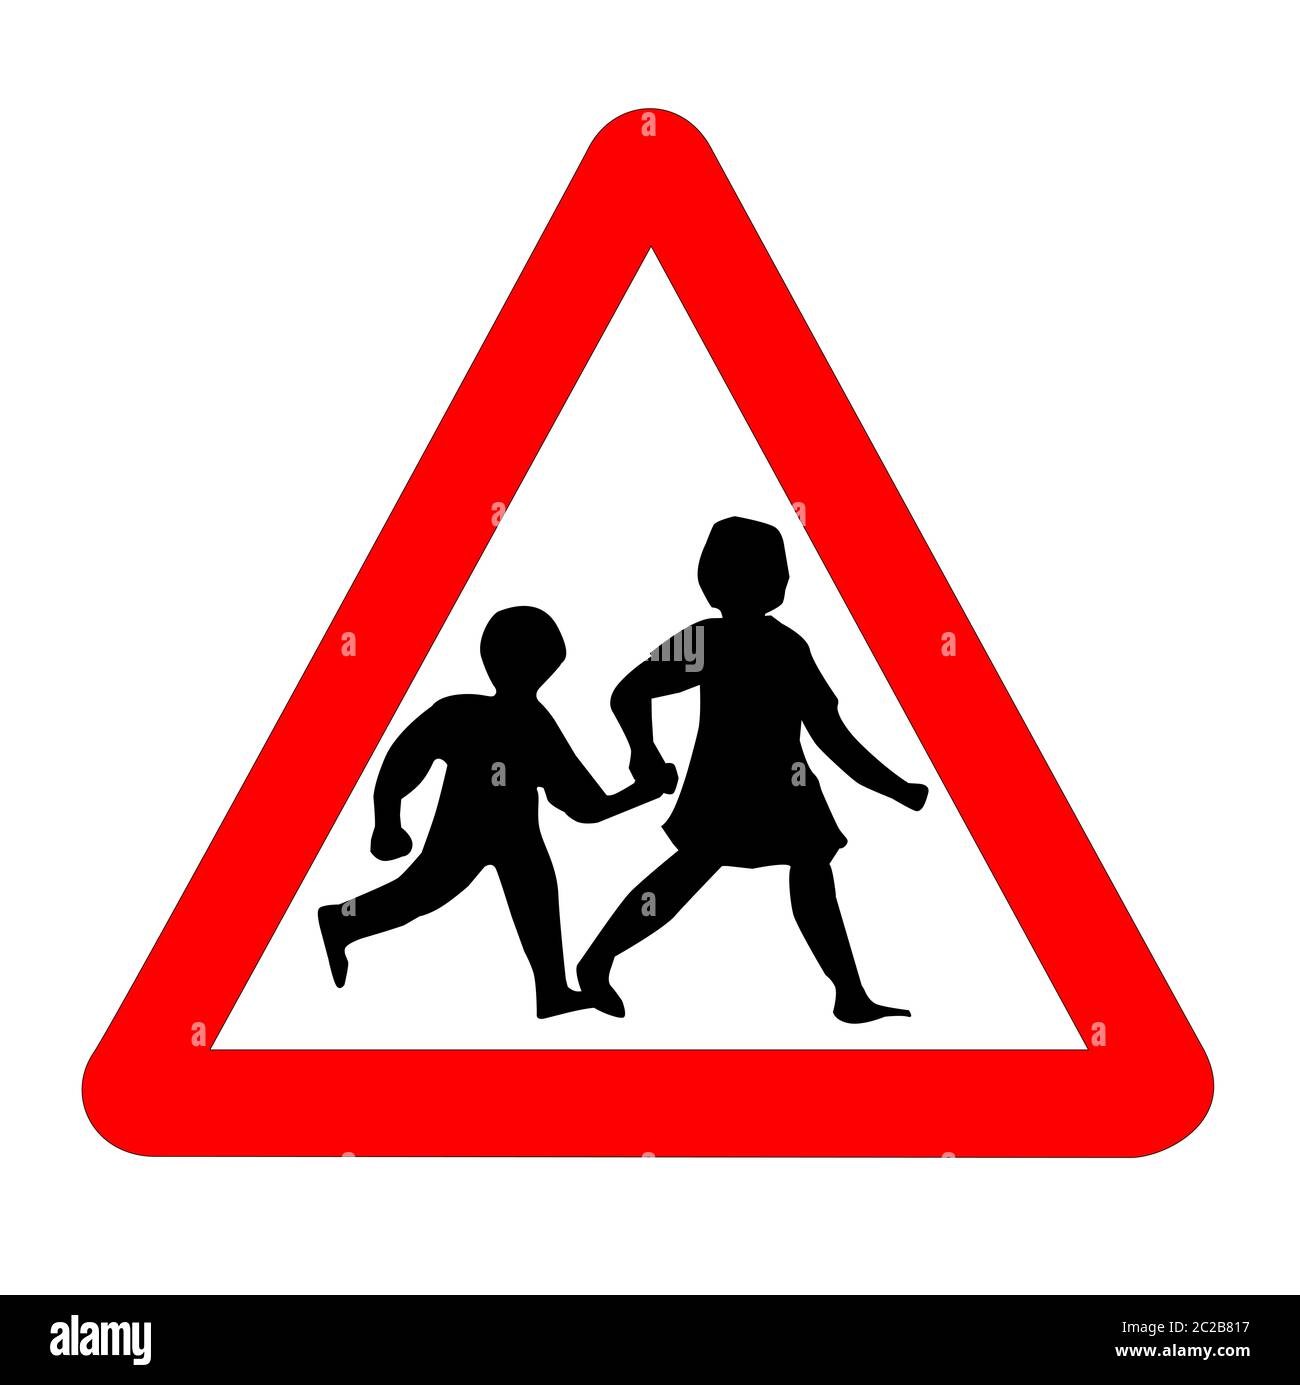 The traditional 'children' traffic sign isolated on a white background. Stock Photo